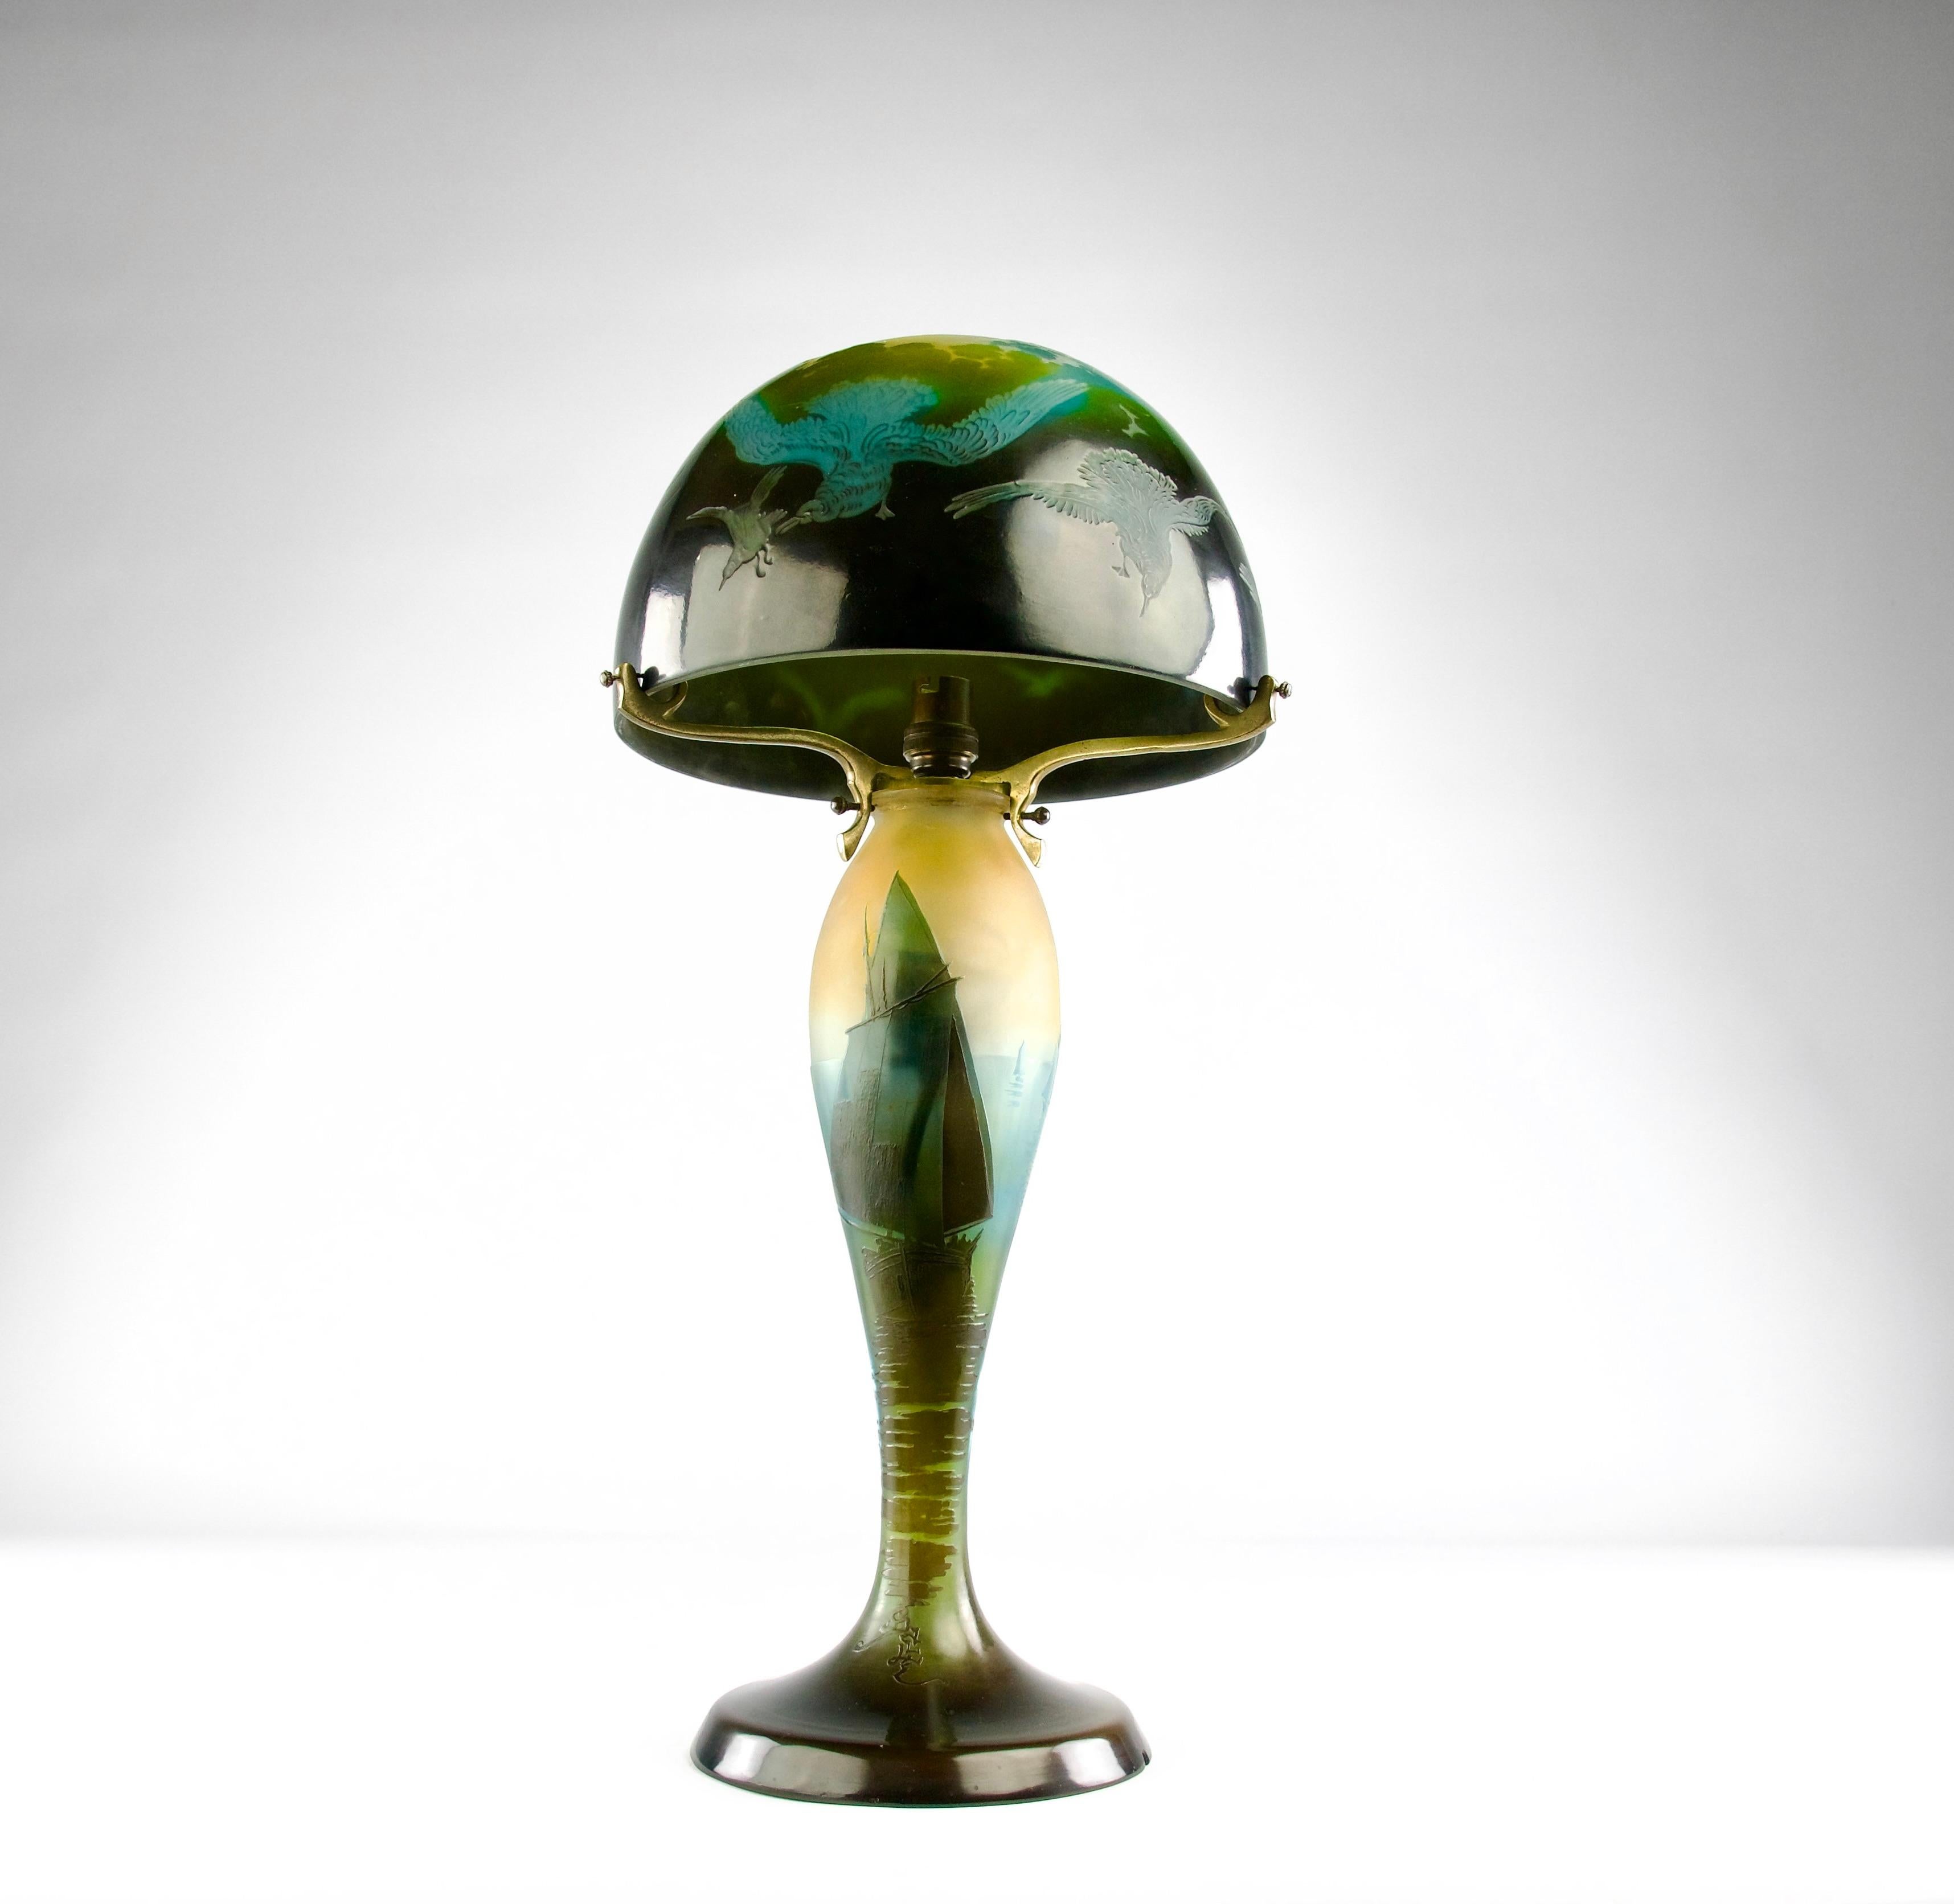 Superb and rare blue hued sailors and seagulls Gallé table lamp, France circa 1920s.

In very good condition.

Dimensions in cm ( H x D ) : 51 x 24

Secure shipping.

Émile Gallé was a French artist and designer who worked in glass, and is